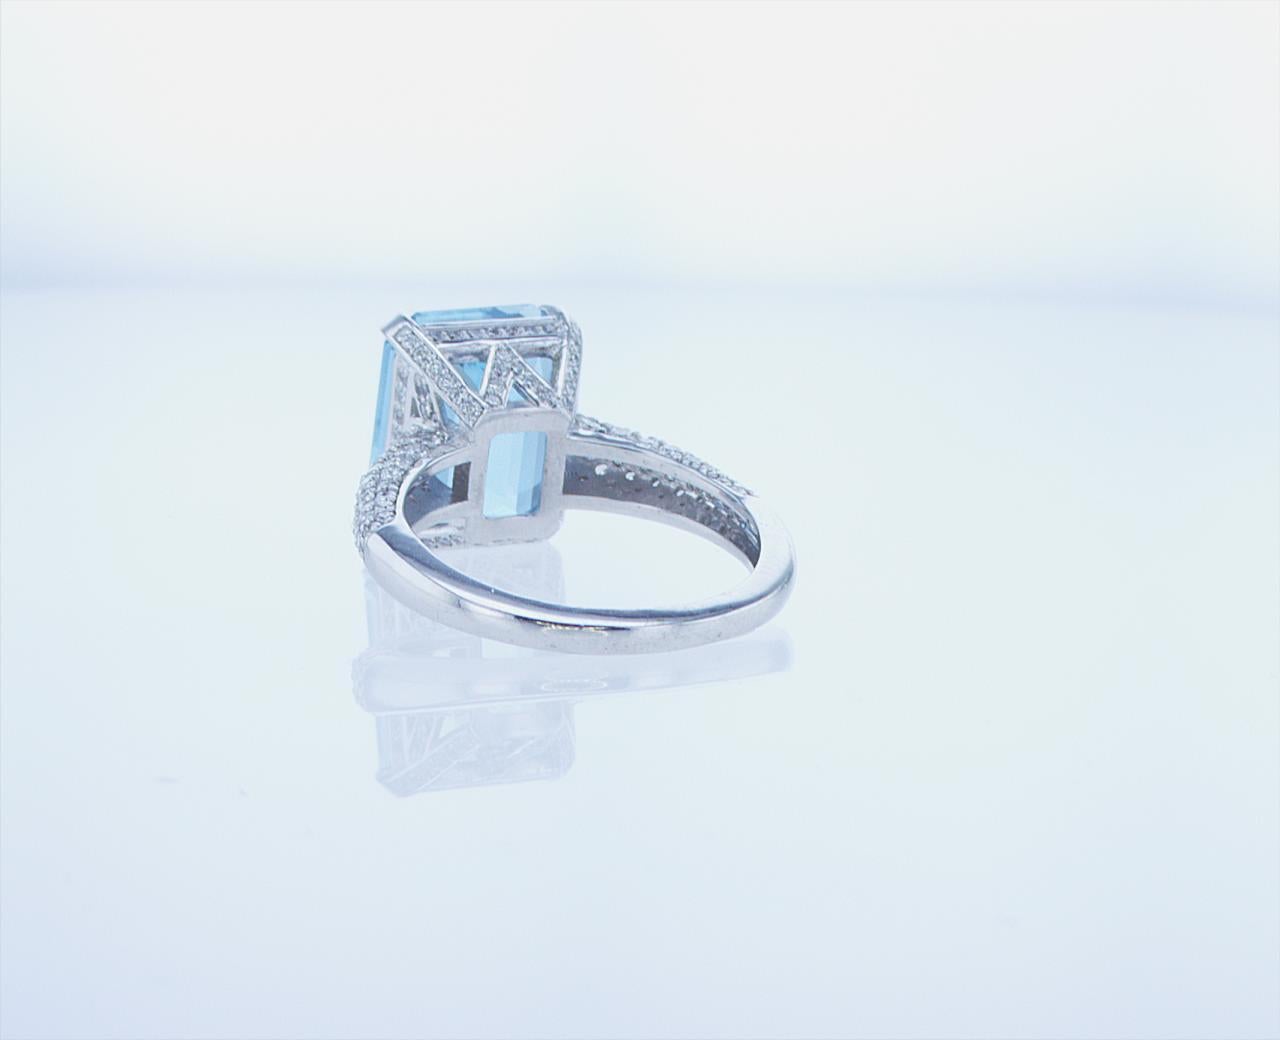 5.37 Ct Aqua Cocktail Ring in 18k White Gold with Palladium For Sale 7